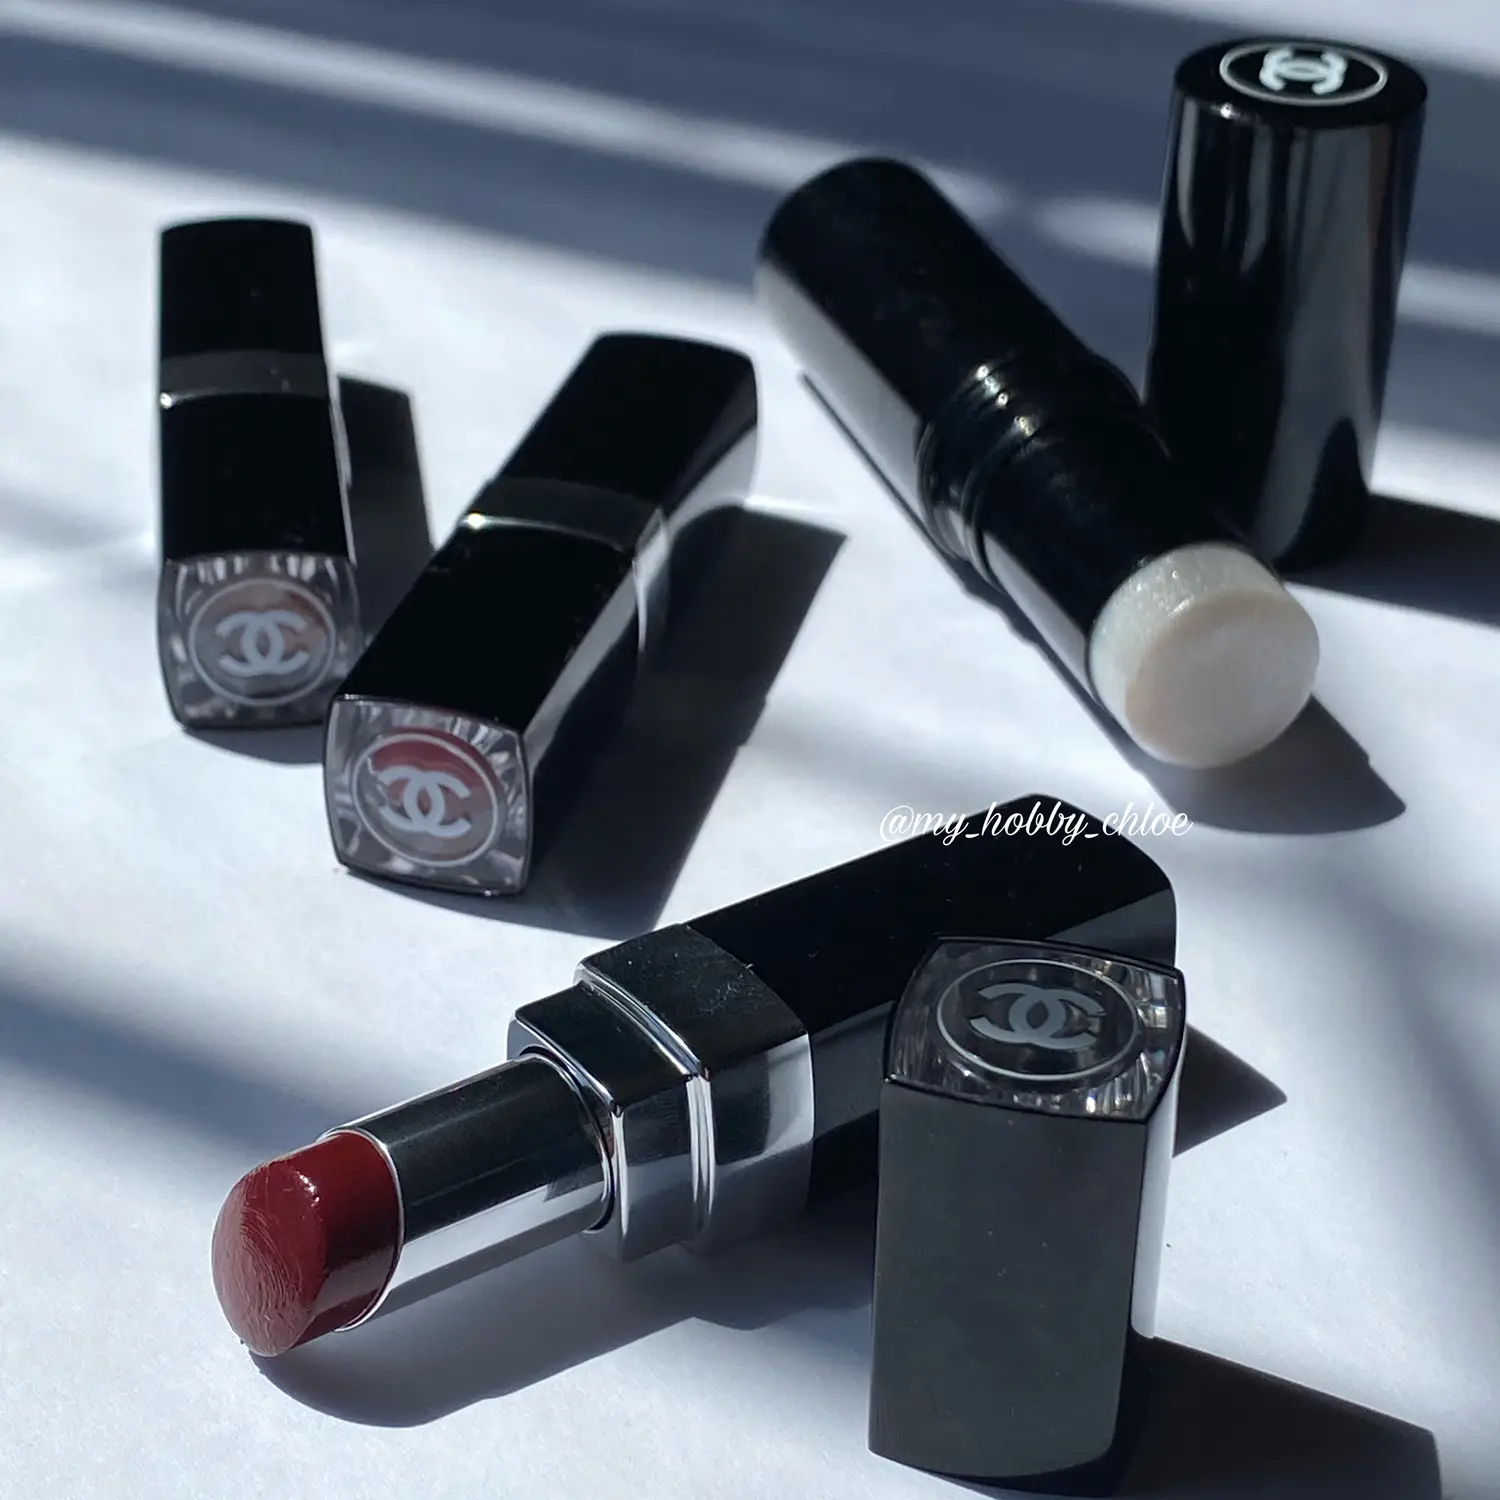 Add more lipstick: the new Rouge Coco Bloom by CHANEL is here 